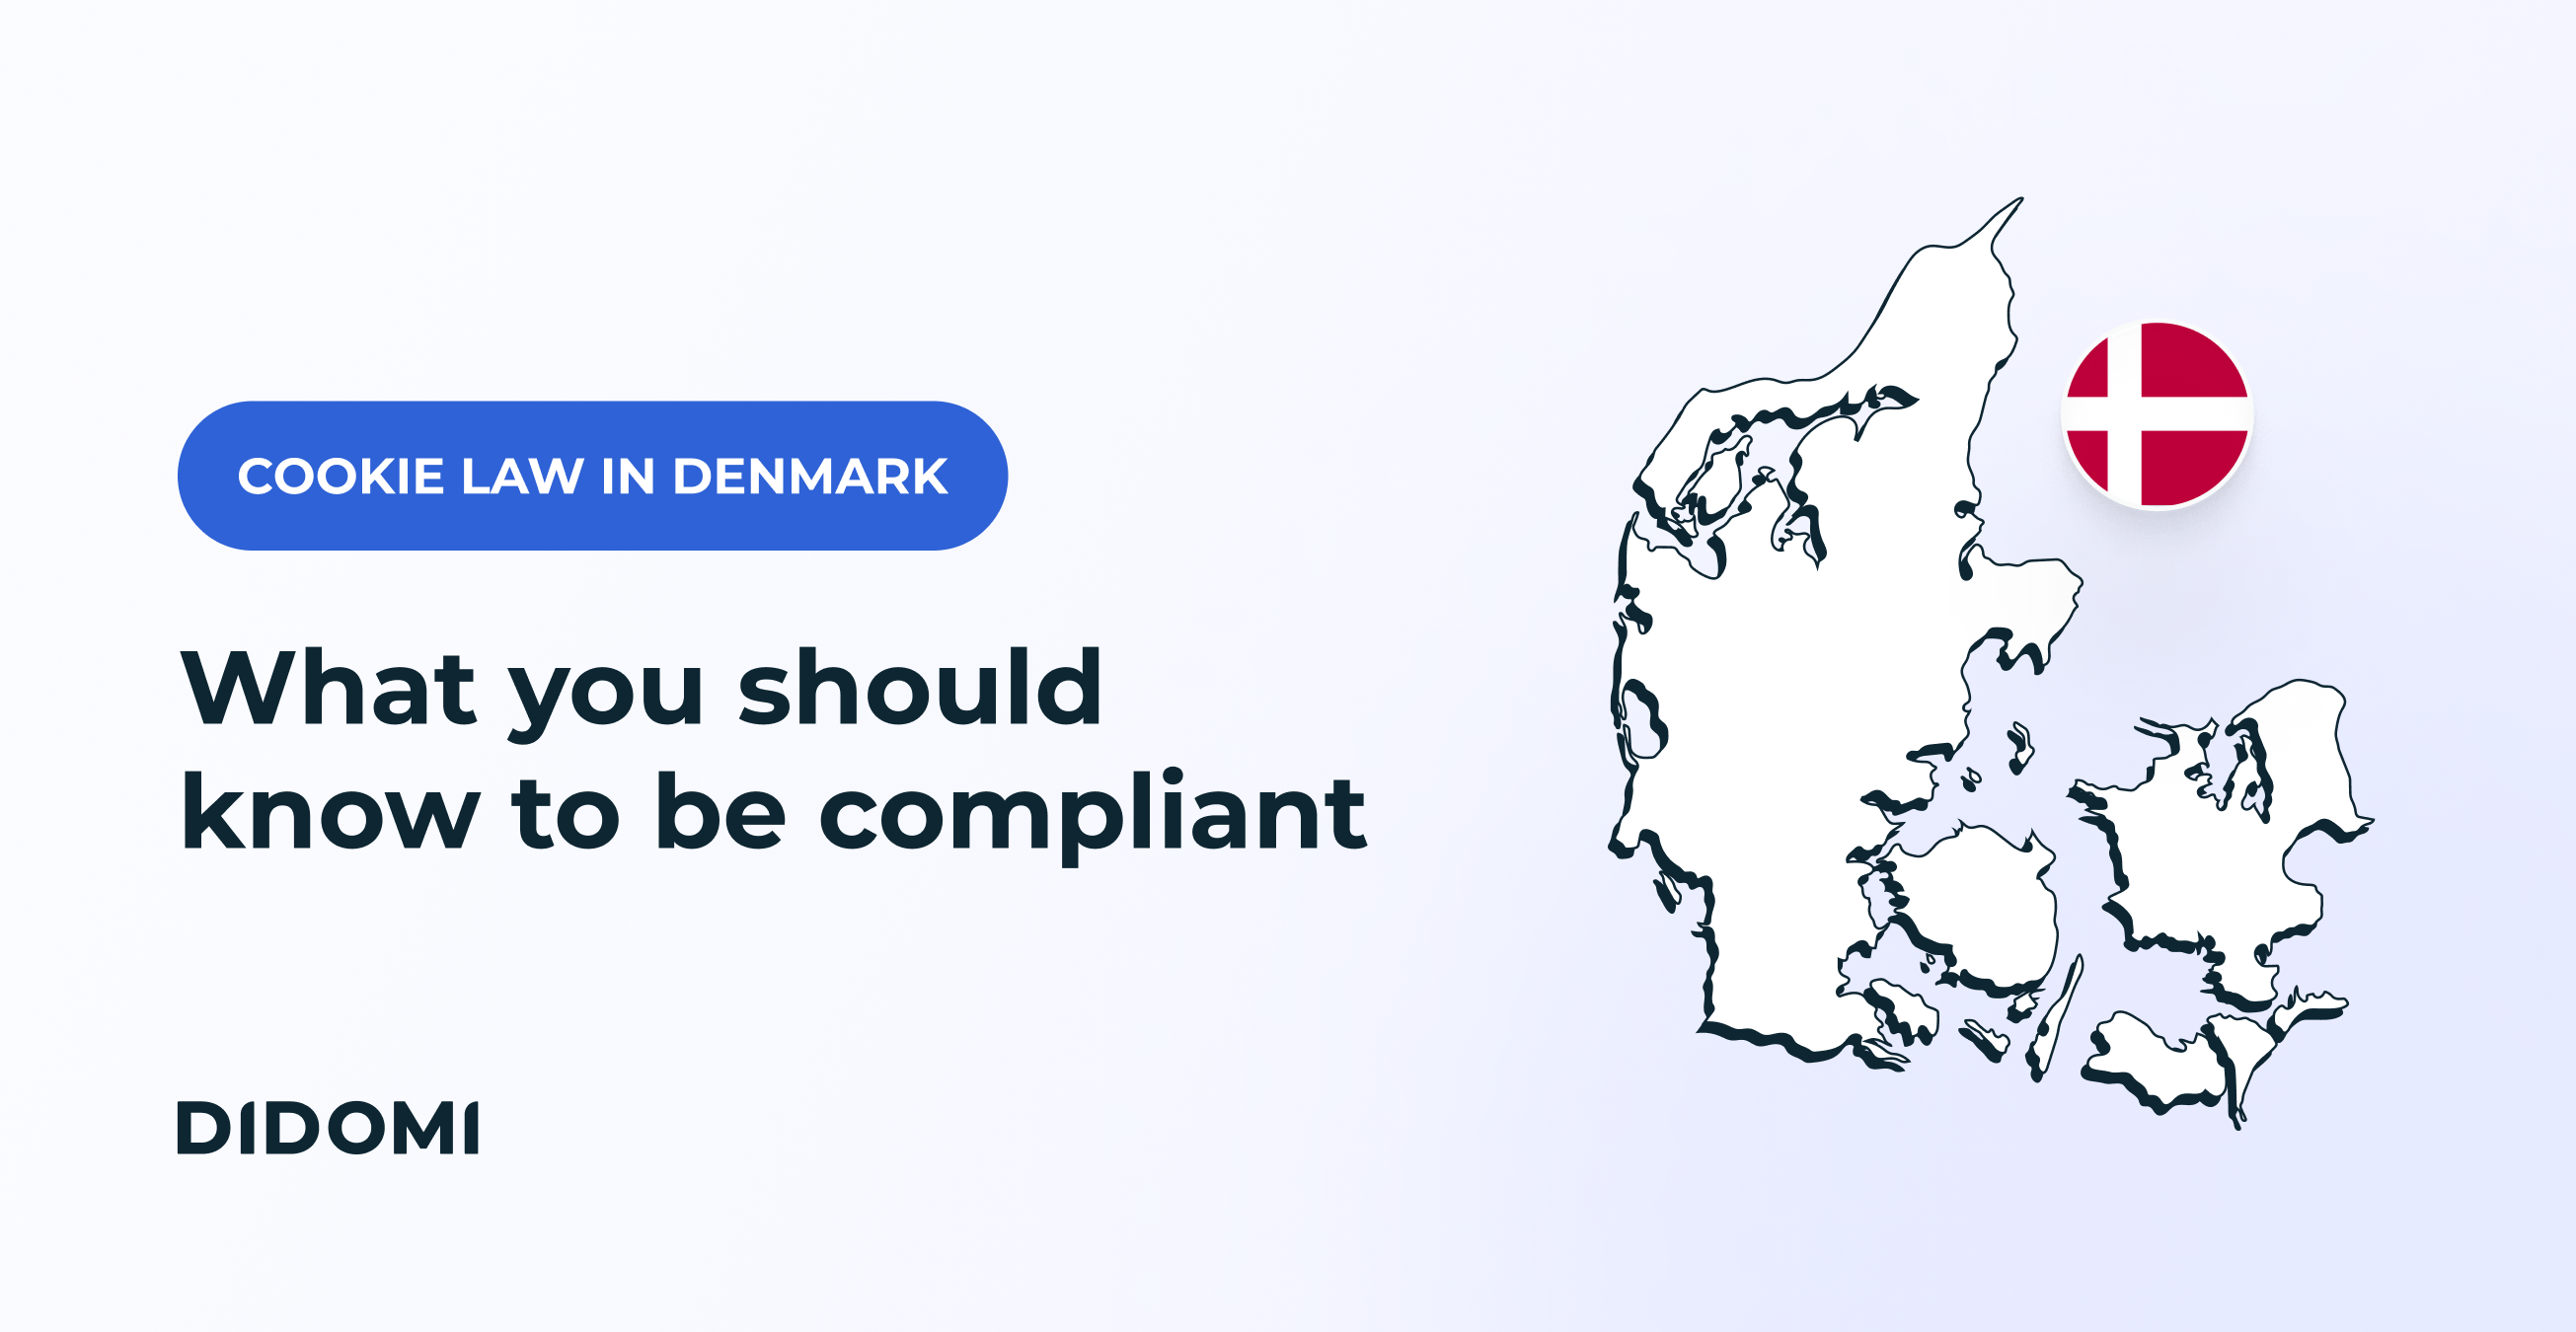 Cookie laws in Denmark and what you should know to be compliant